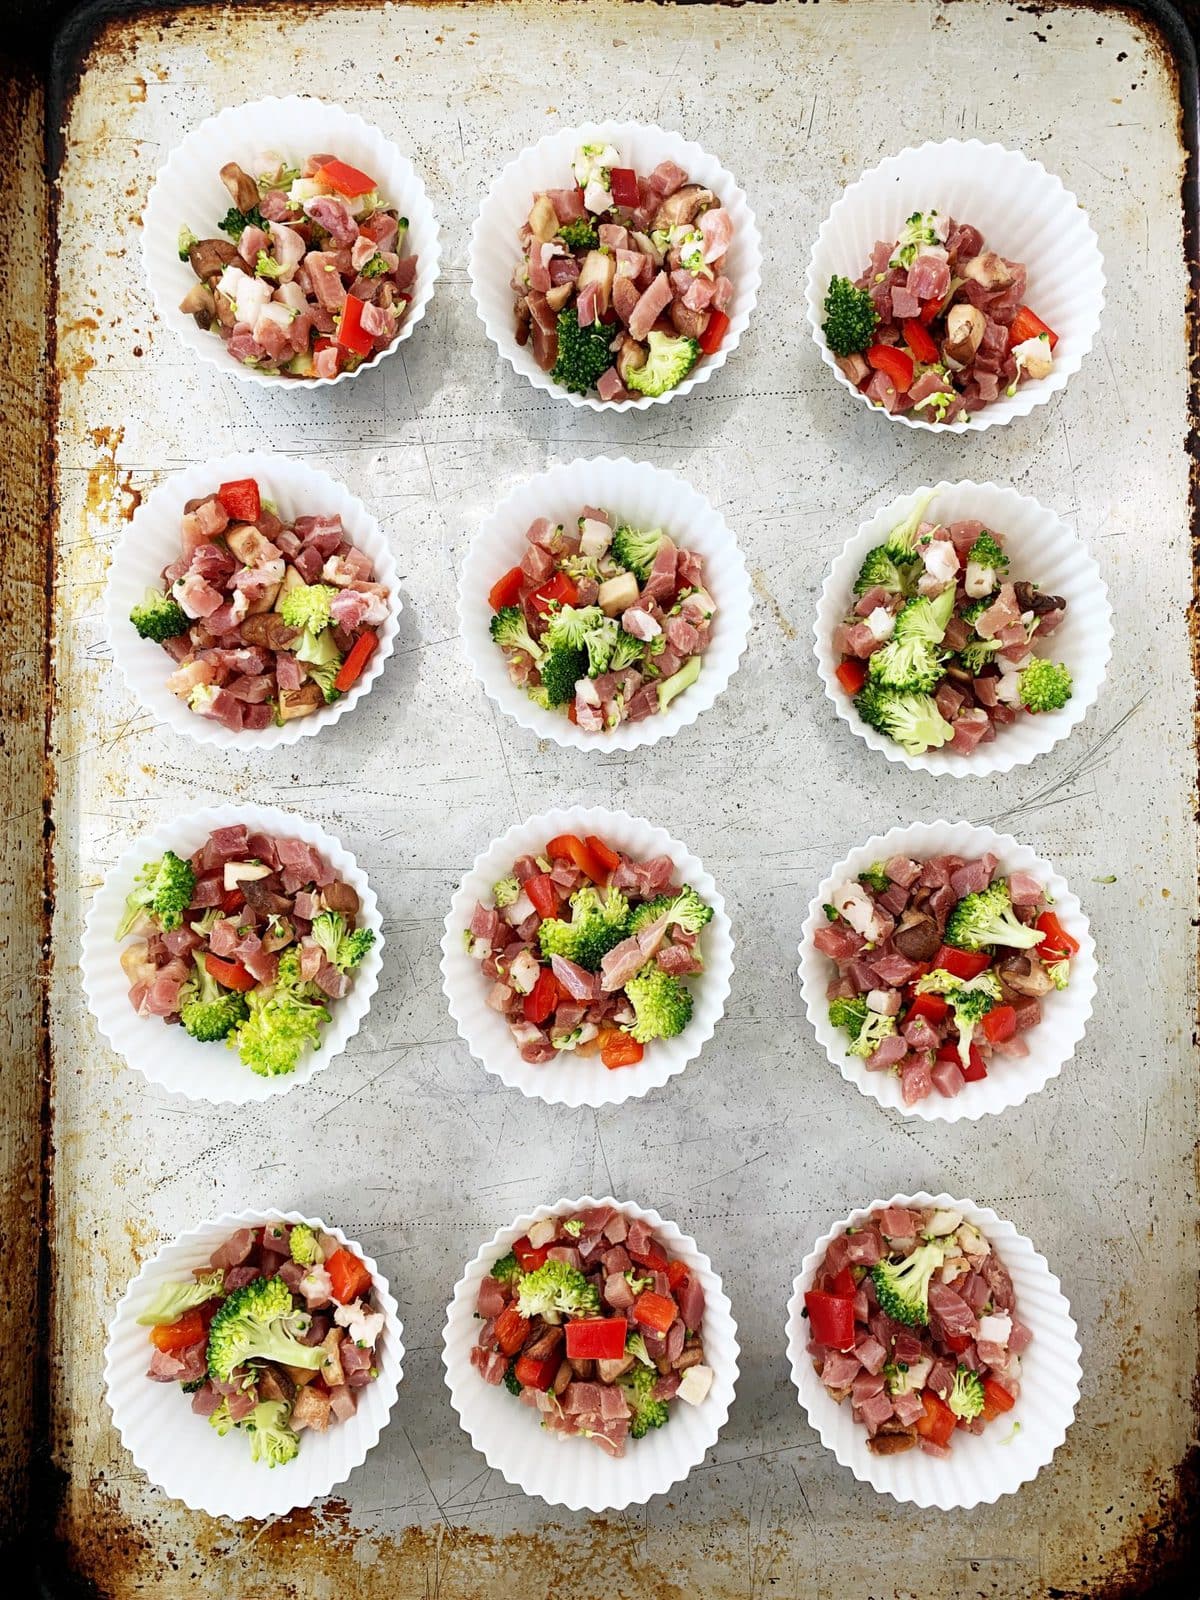 Overhead shot of muffin cups filled with meat and vegetables